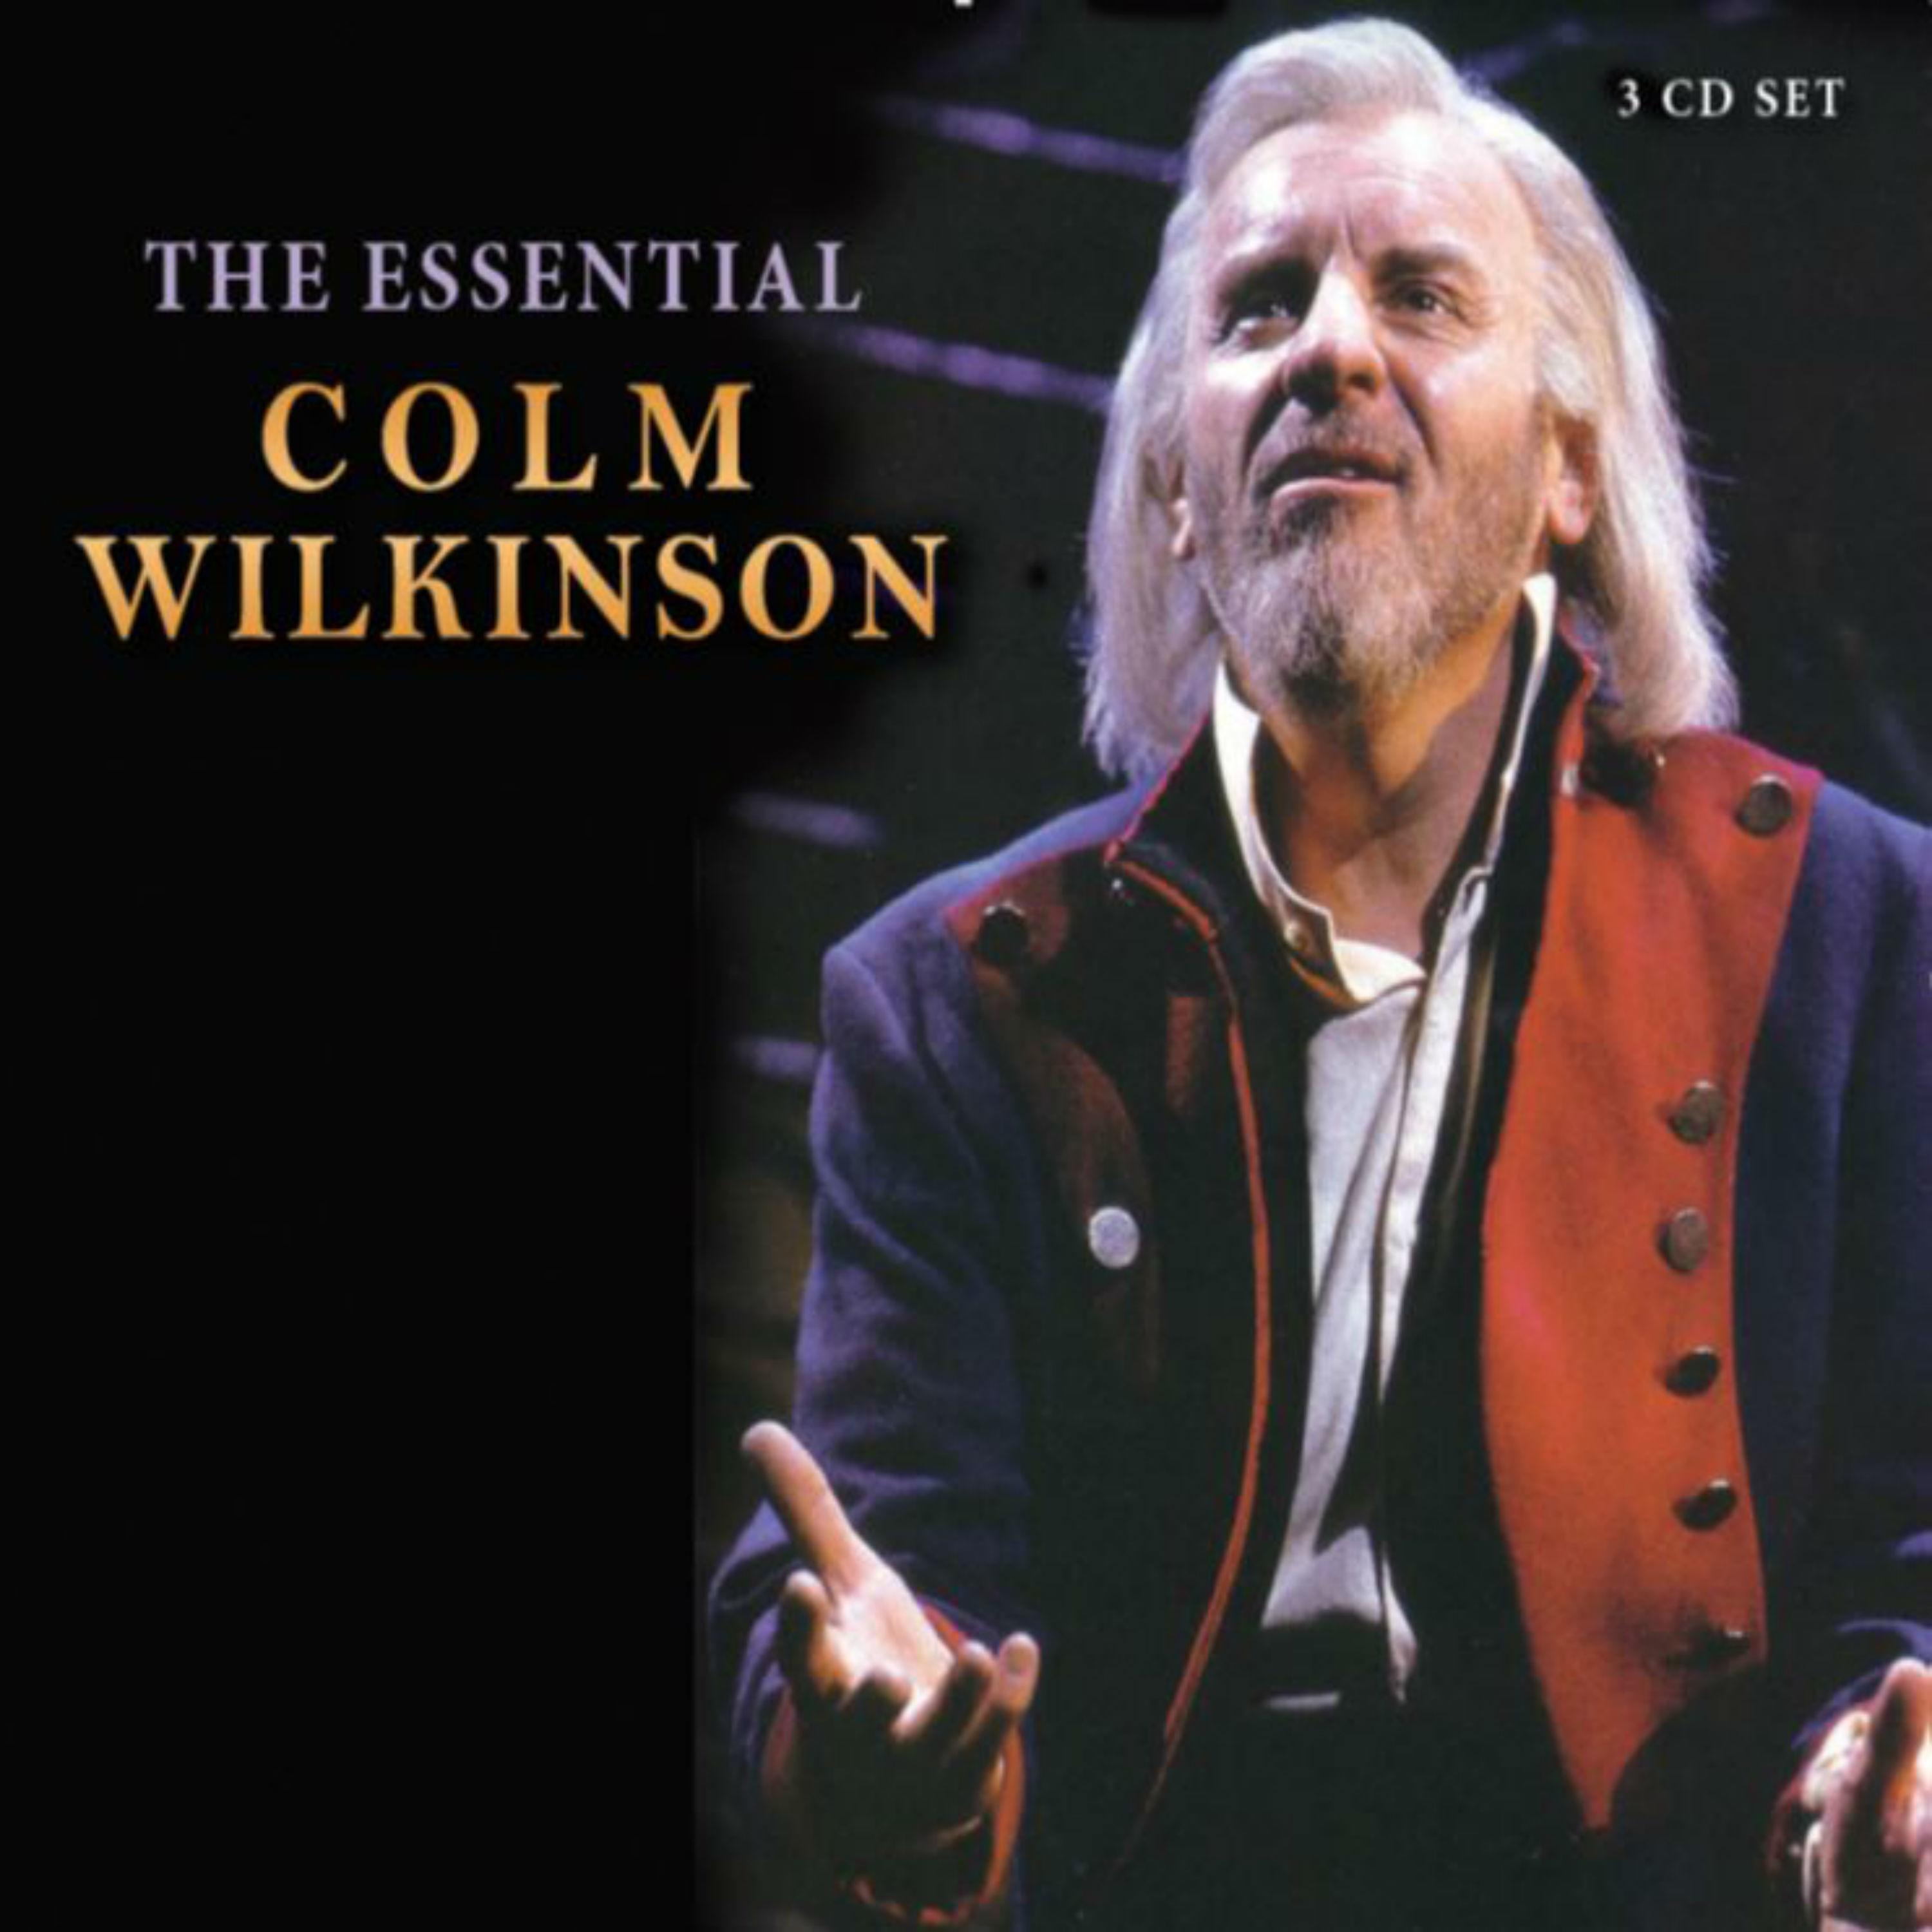 Colm Wilkinson - This Is the Moment (From 